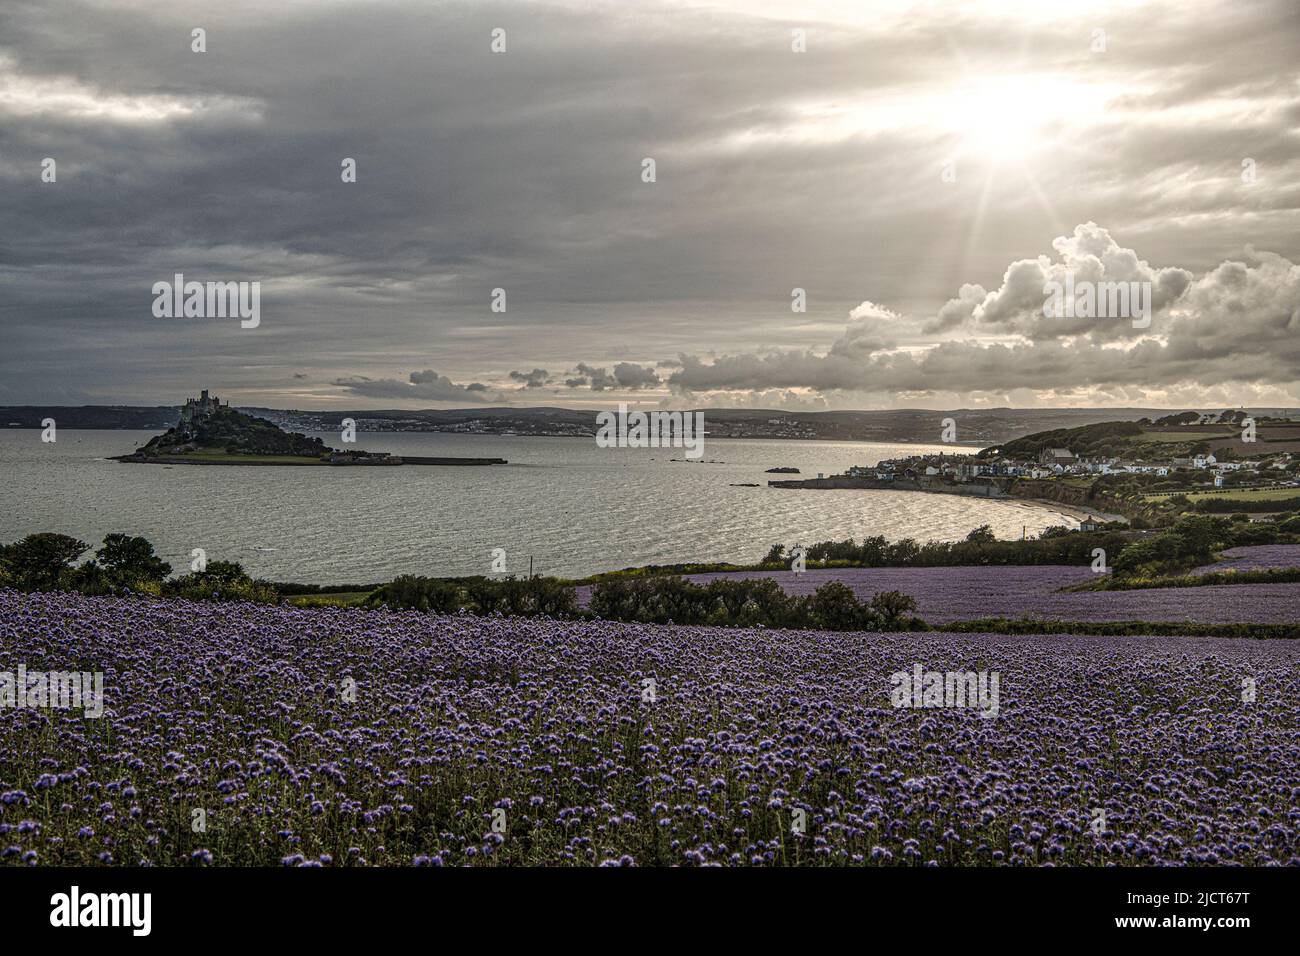 St Michaels mount Marazion Penzance Cornwall uk,Phacelia or commonly known as purple or blue Tansy cropCornish fields growing Phacelia Stock Photo